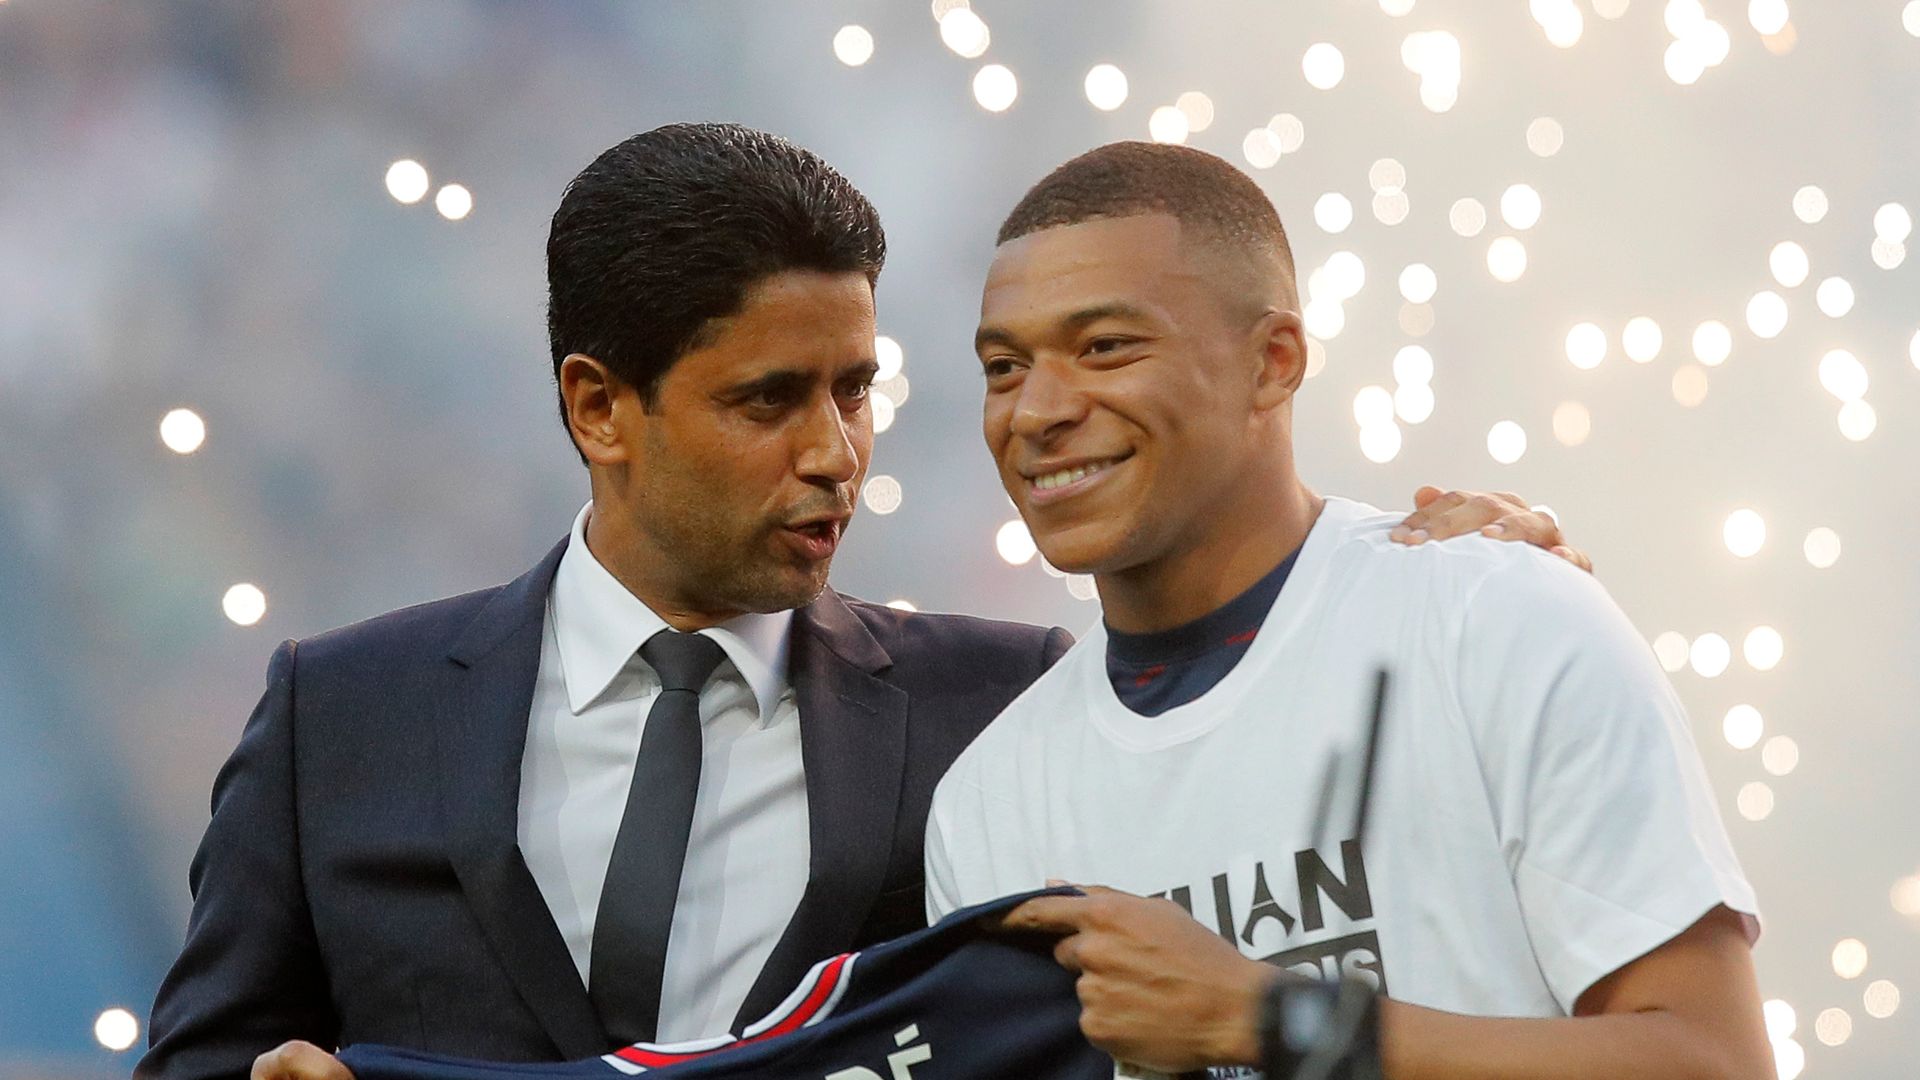 Ligue 1 chief hit outs at La Liga's 'disrespectful smears' over Mbappe complaint